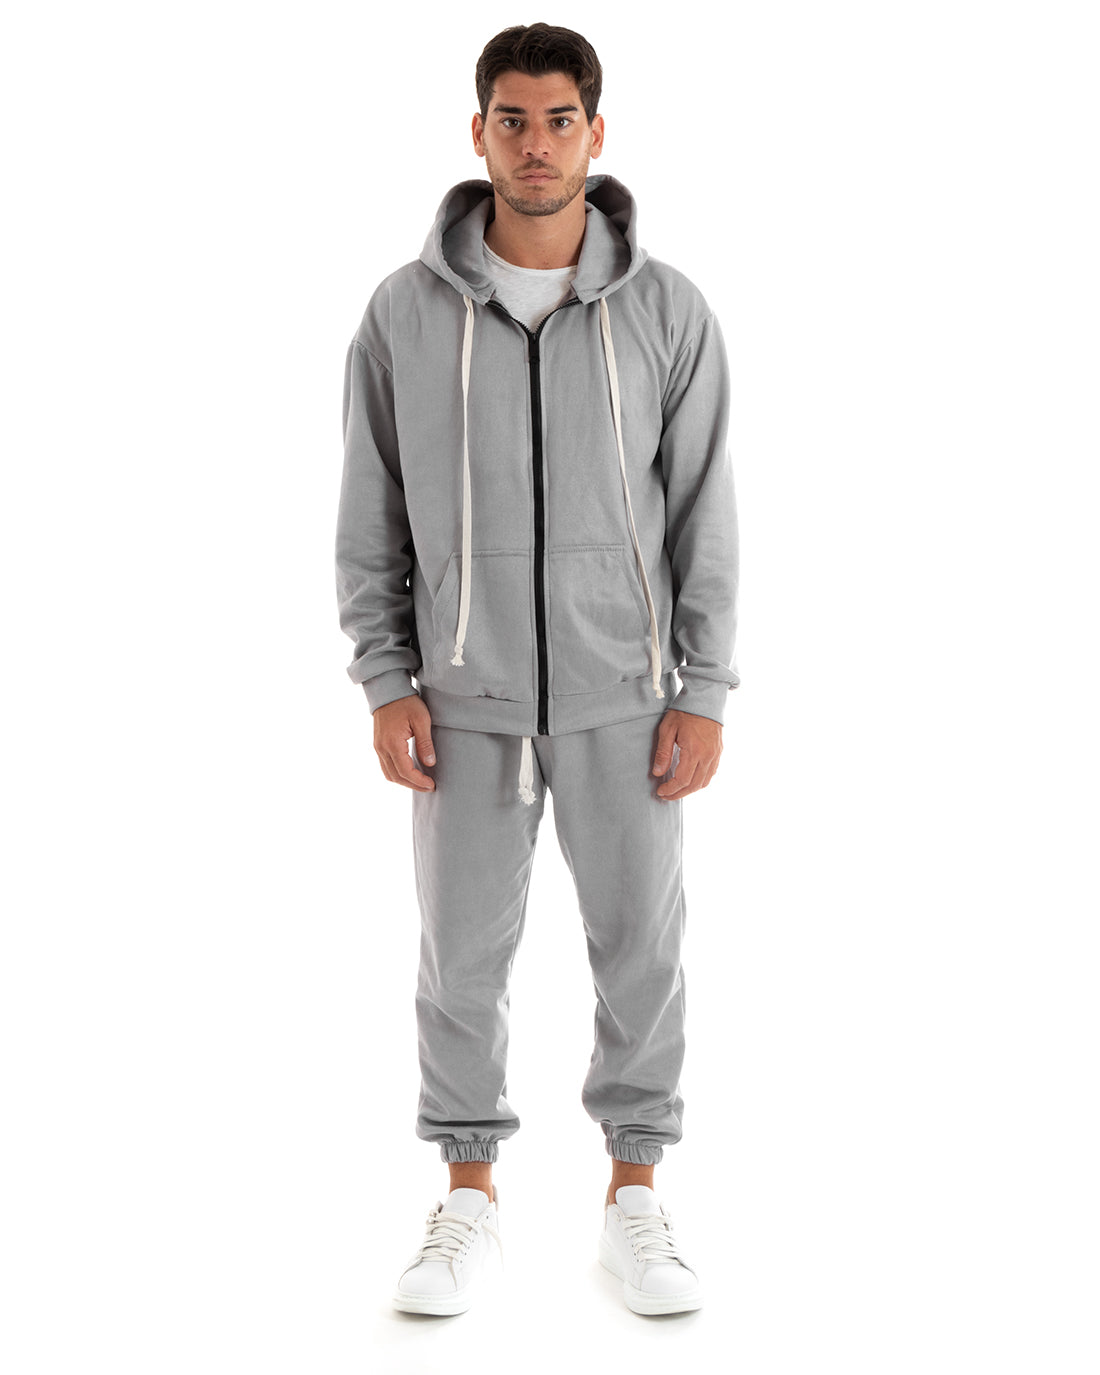 Men's Tracksuit Set, Hooded Sweatshirt and Zip Trousers with Drawstring Waist in Light Gray Eco Suede GIOSAL-OU2399A